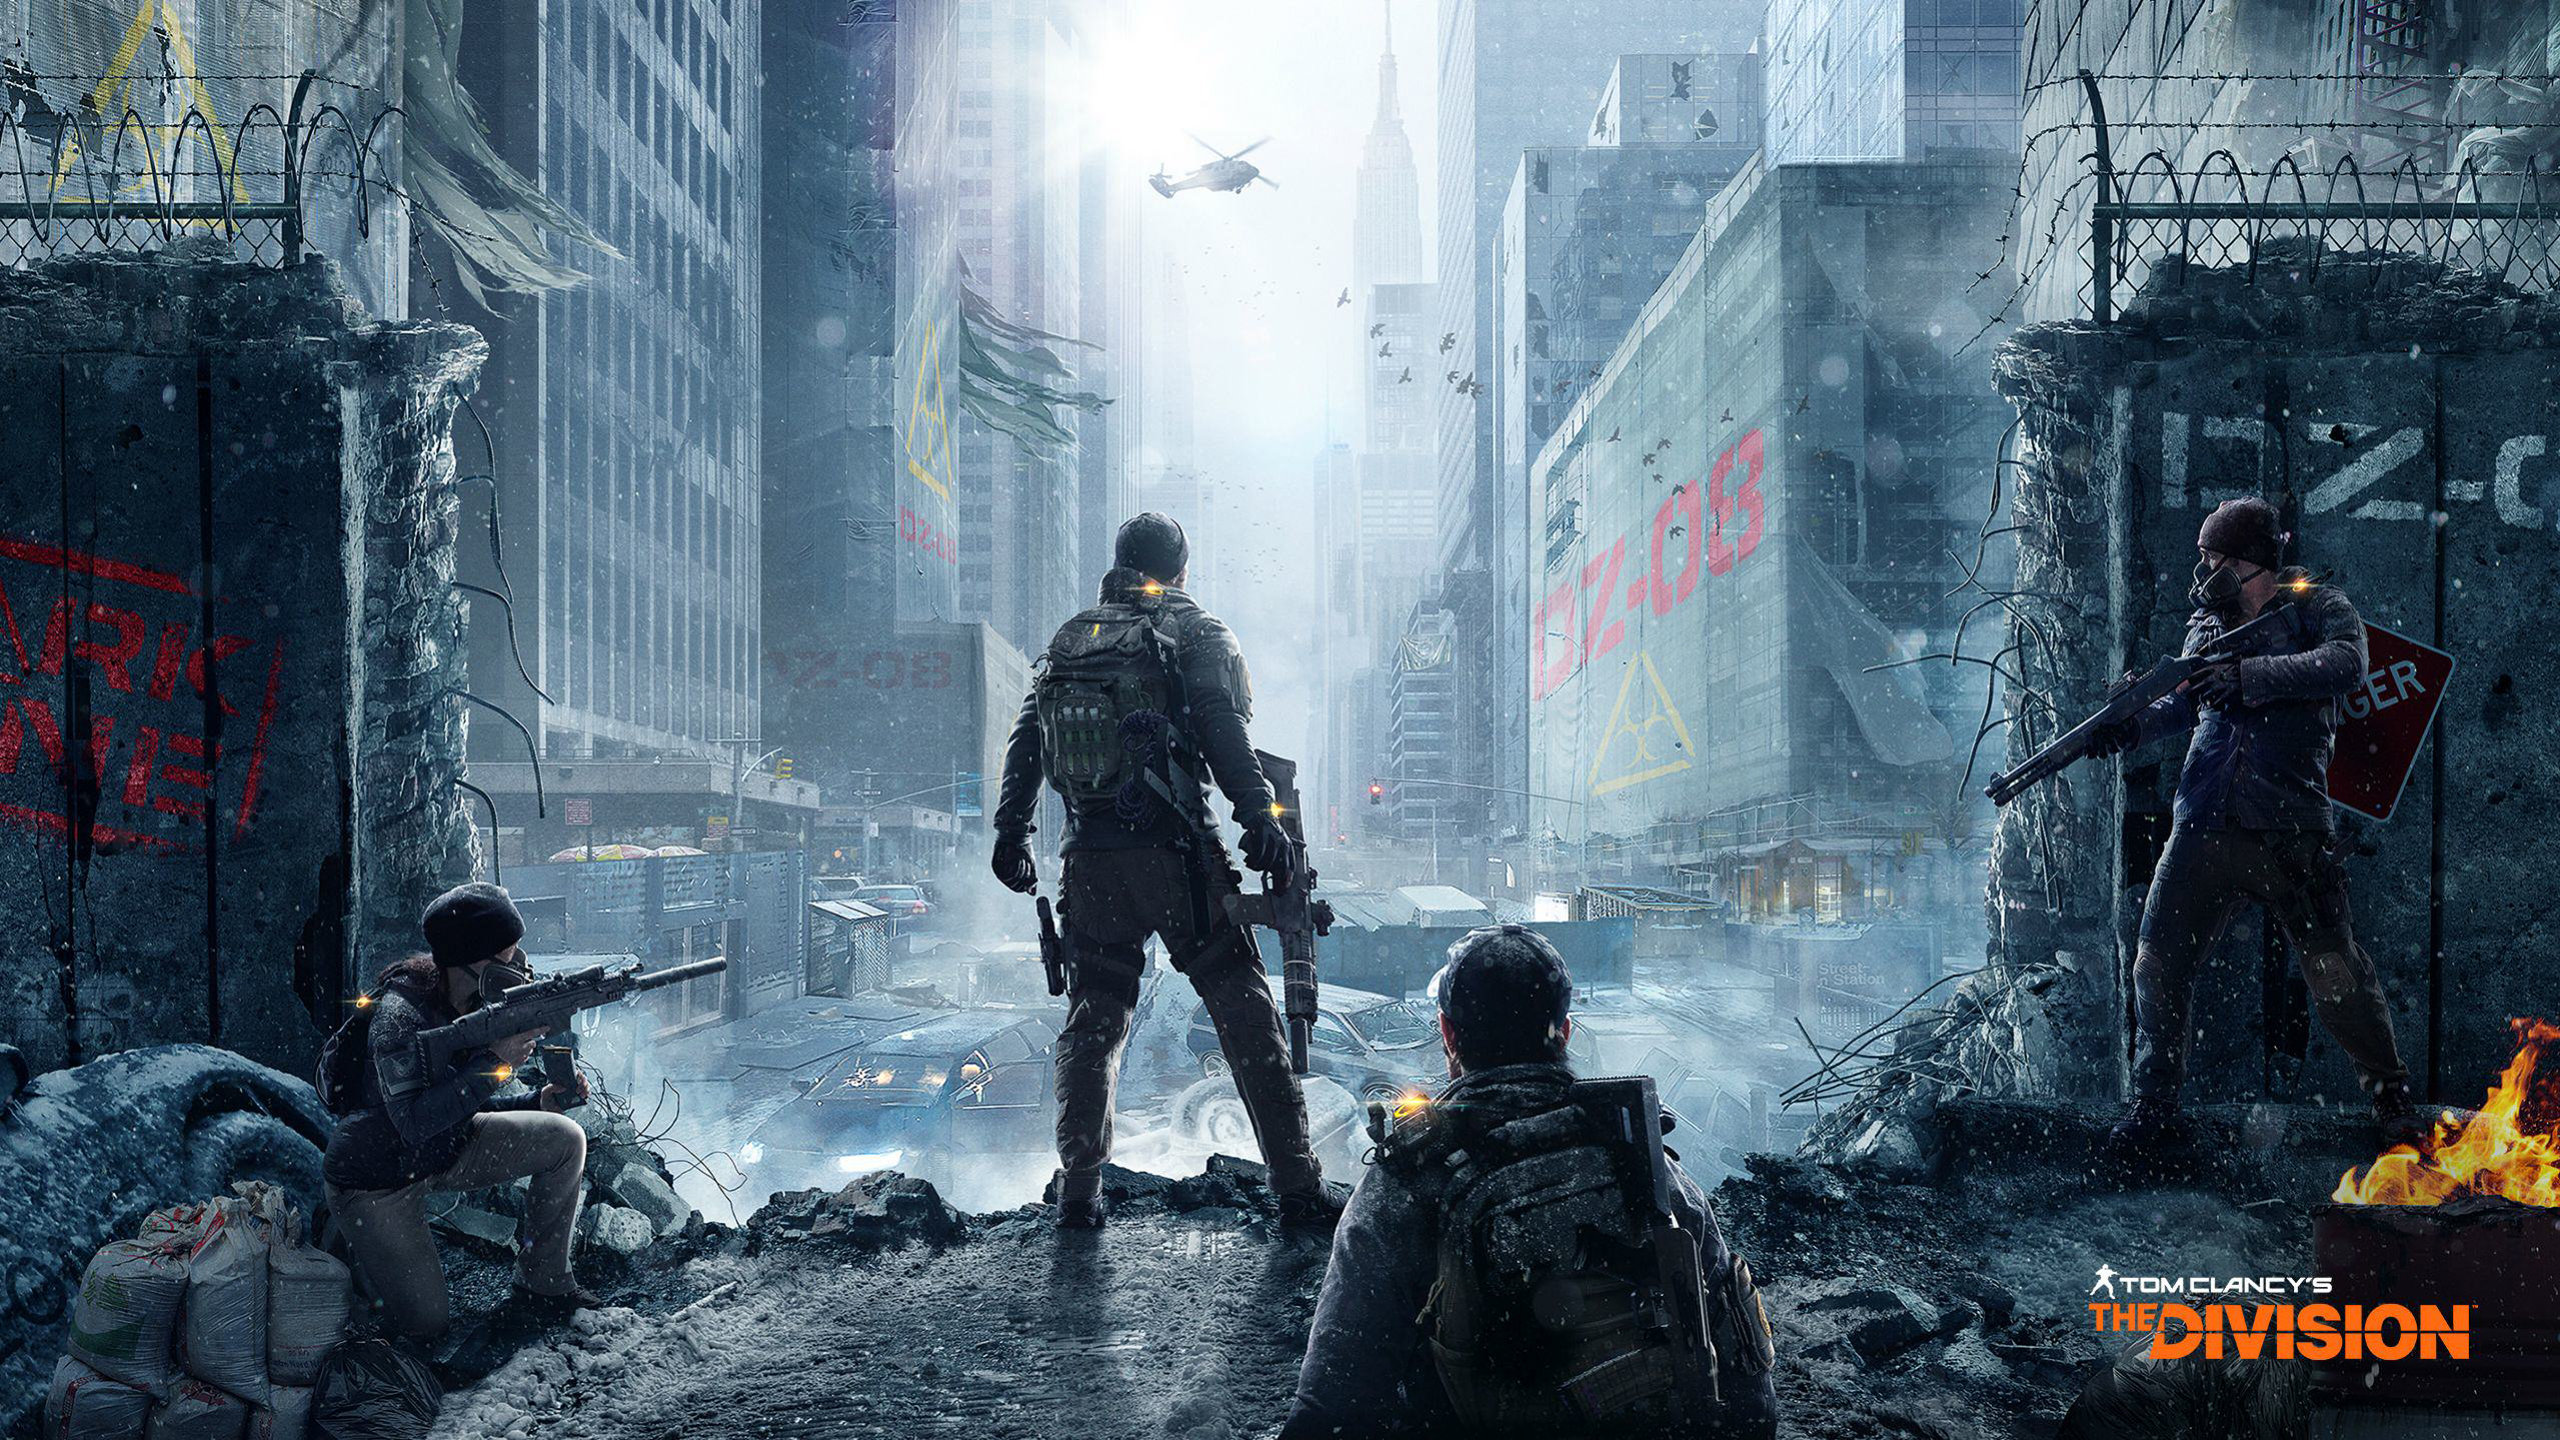 Download hd 2560x1440 Tom Clancy's The Division desktop background ID:450096 for free